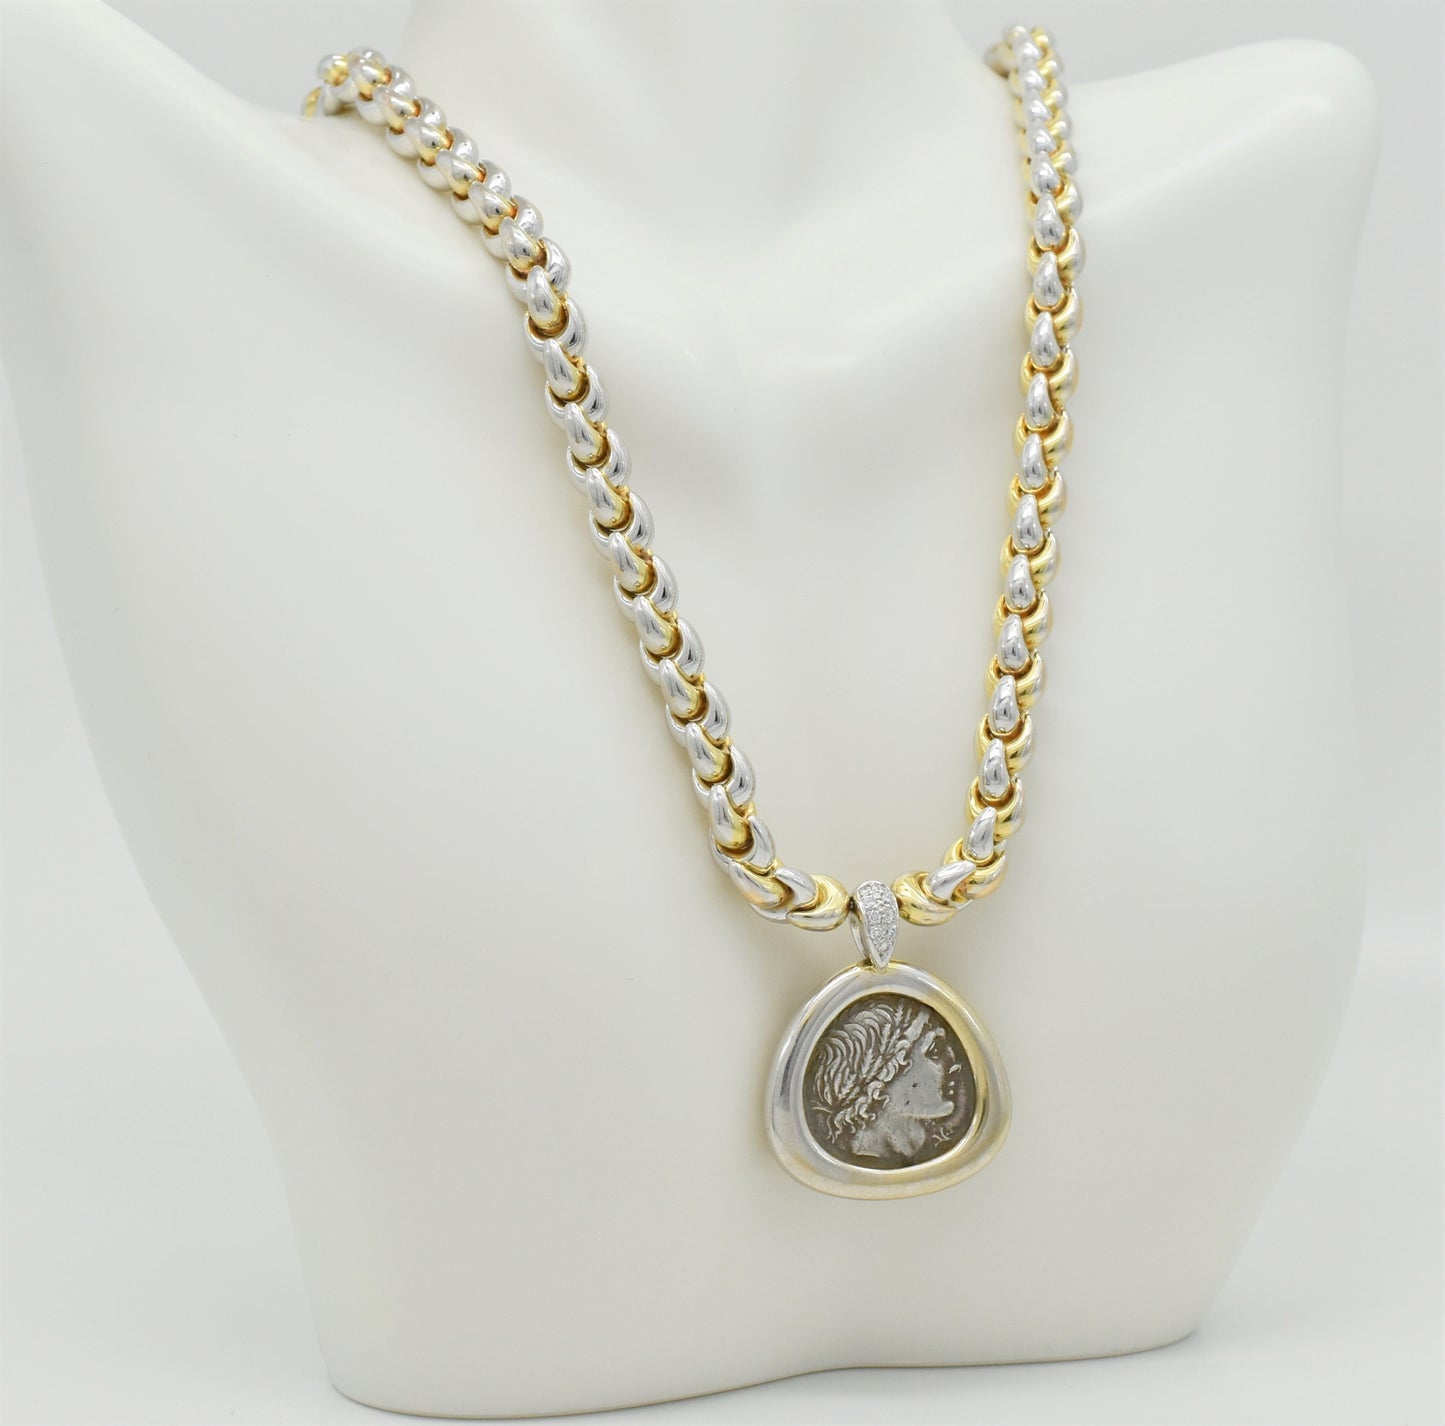 18k Yellow Gold & Platinum Diamond Roman Coin Necklace, 16.5 inches - 53.0g